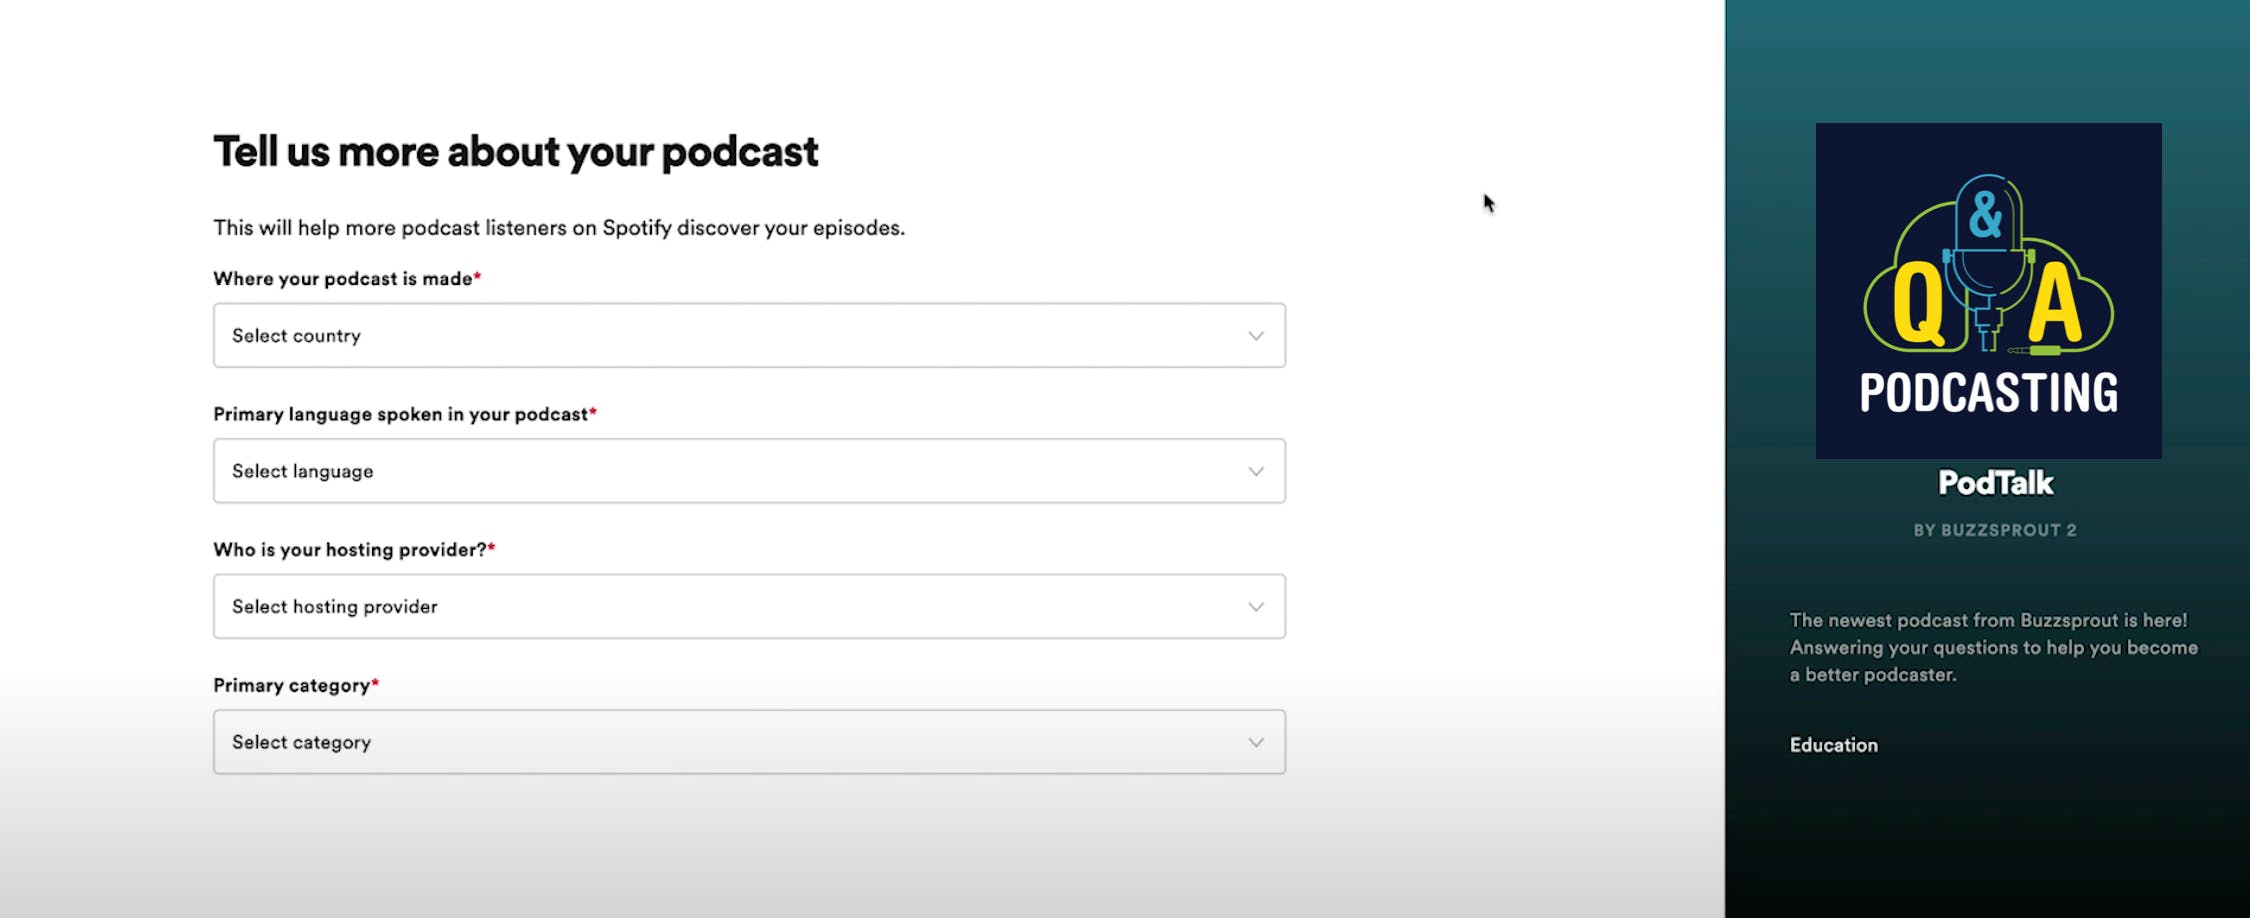 Dropdown menus for podcast categories and others details about your podcast